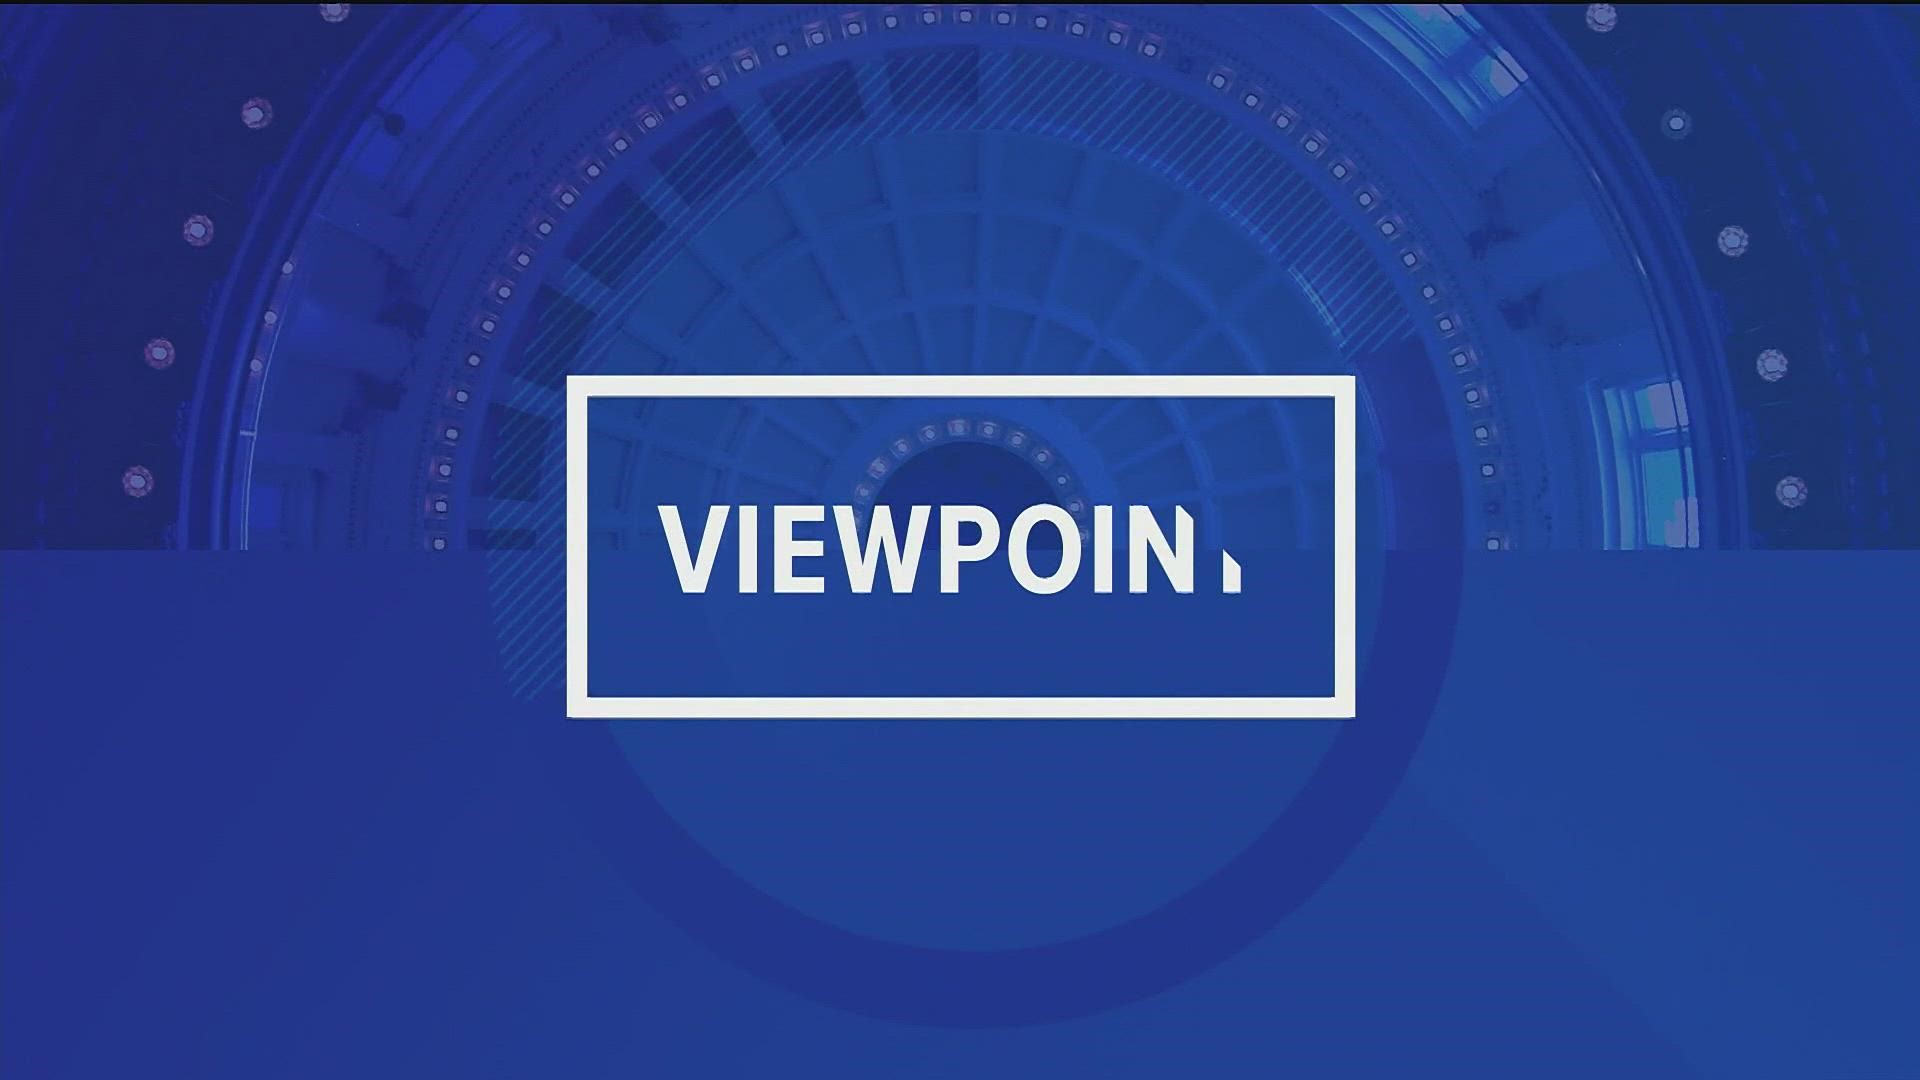 On this Viewpoint, Republican Senator Jim Risch and Democrat Paulette Jordan discuss pandemic response, economic stimulus, education and the Affordable Care Act.